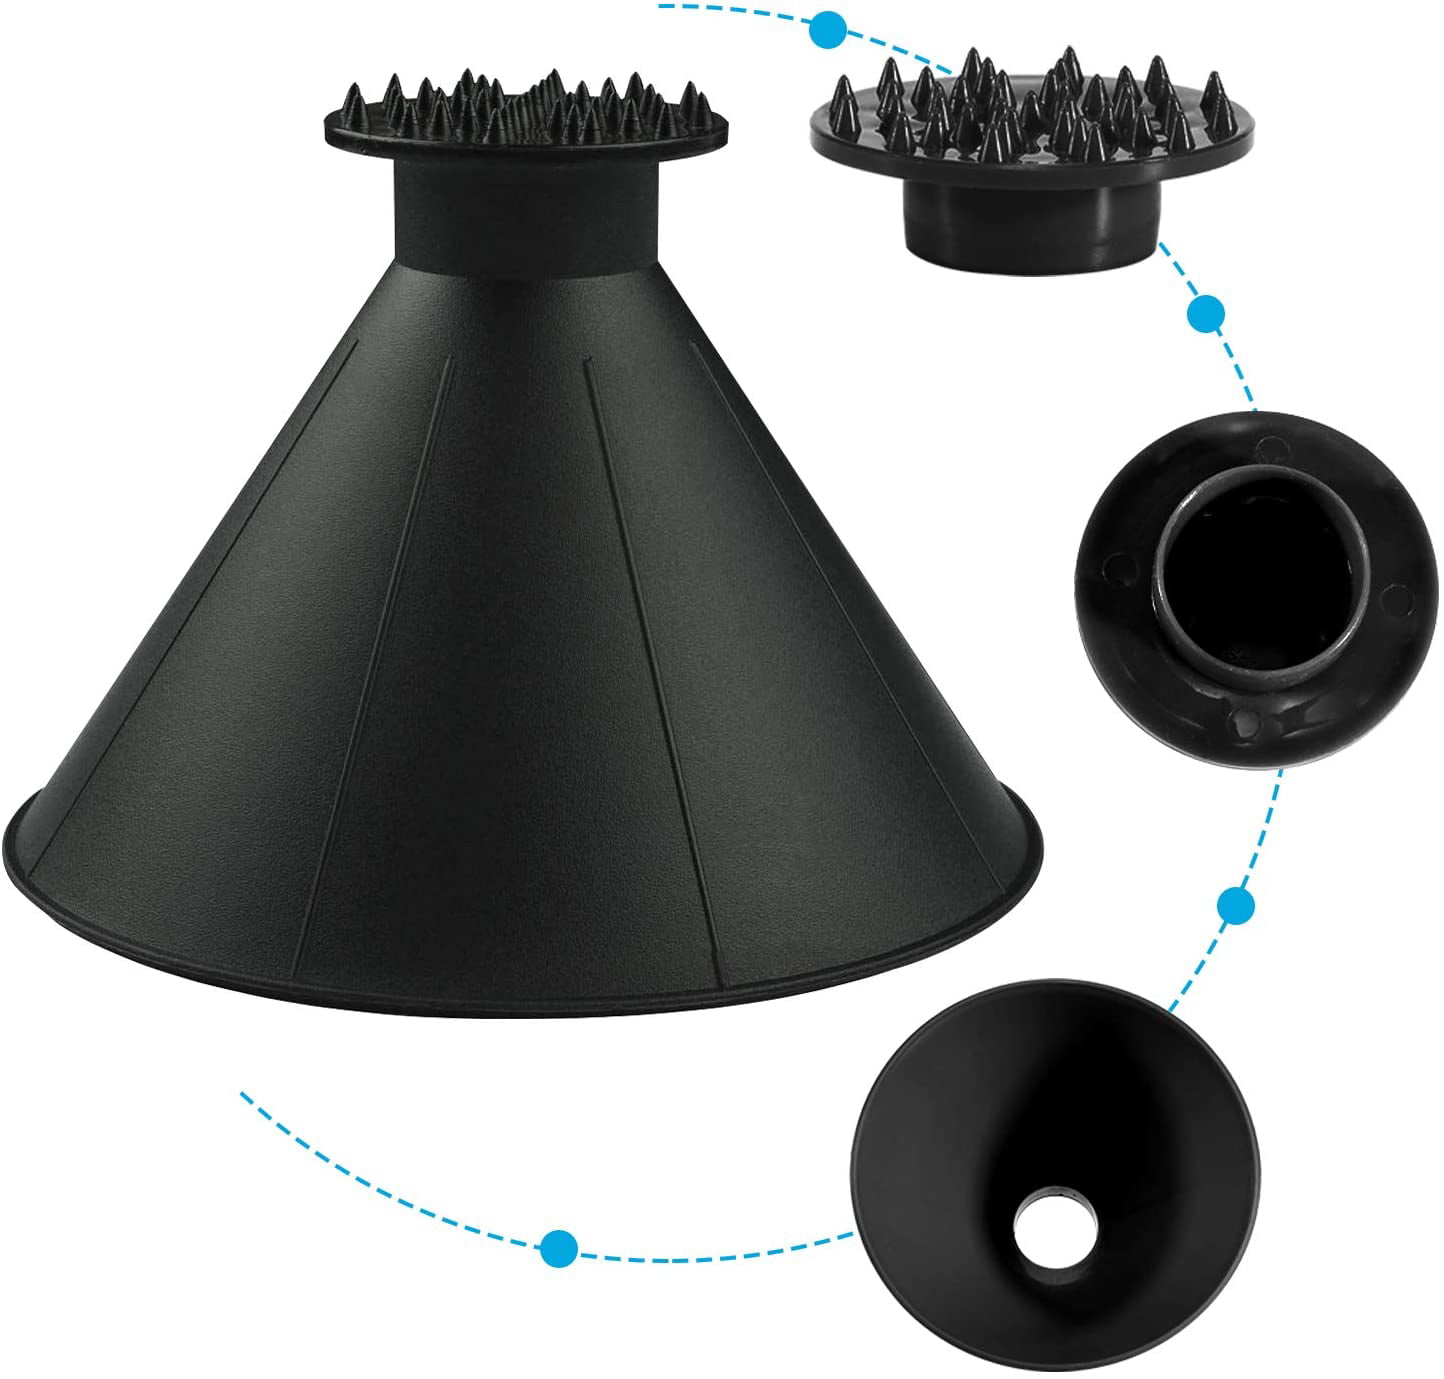 Magical Ice Scrapers for Car Windshield - 2 Pack Cone Magic Car Ice Scraper  with Funnel, Round Snow Scraper for Christmas Gift 